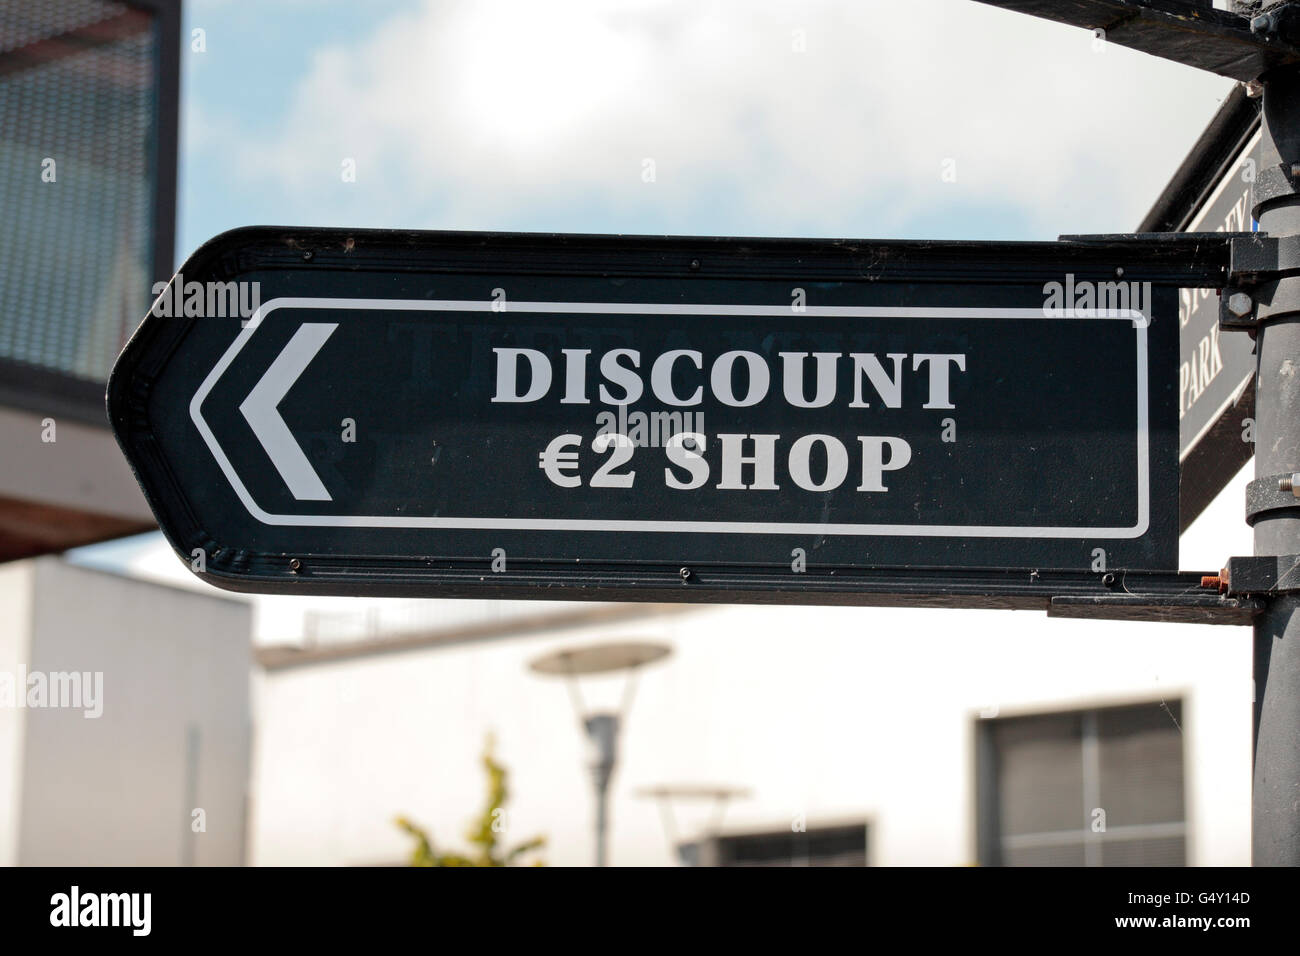 Street sign pointing to the 'Discount €2 Shop'in Dungarvan, Co. Waterford, Ireland (Eire). Stock Photo